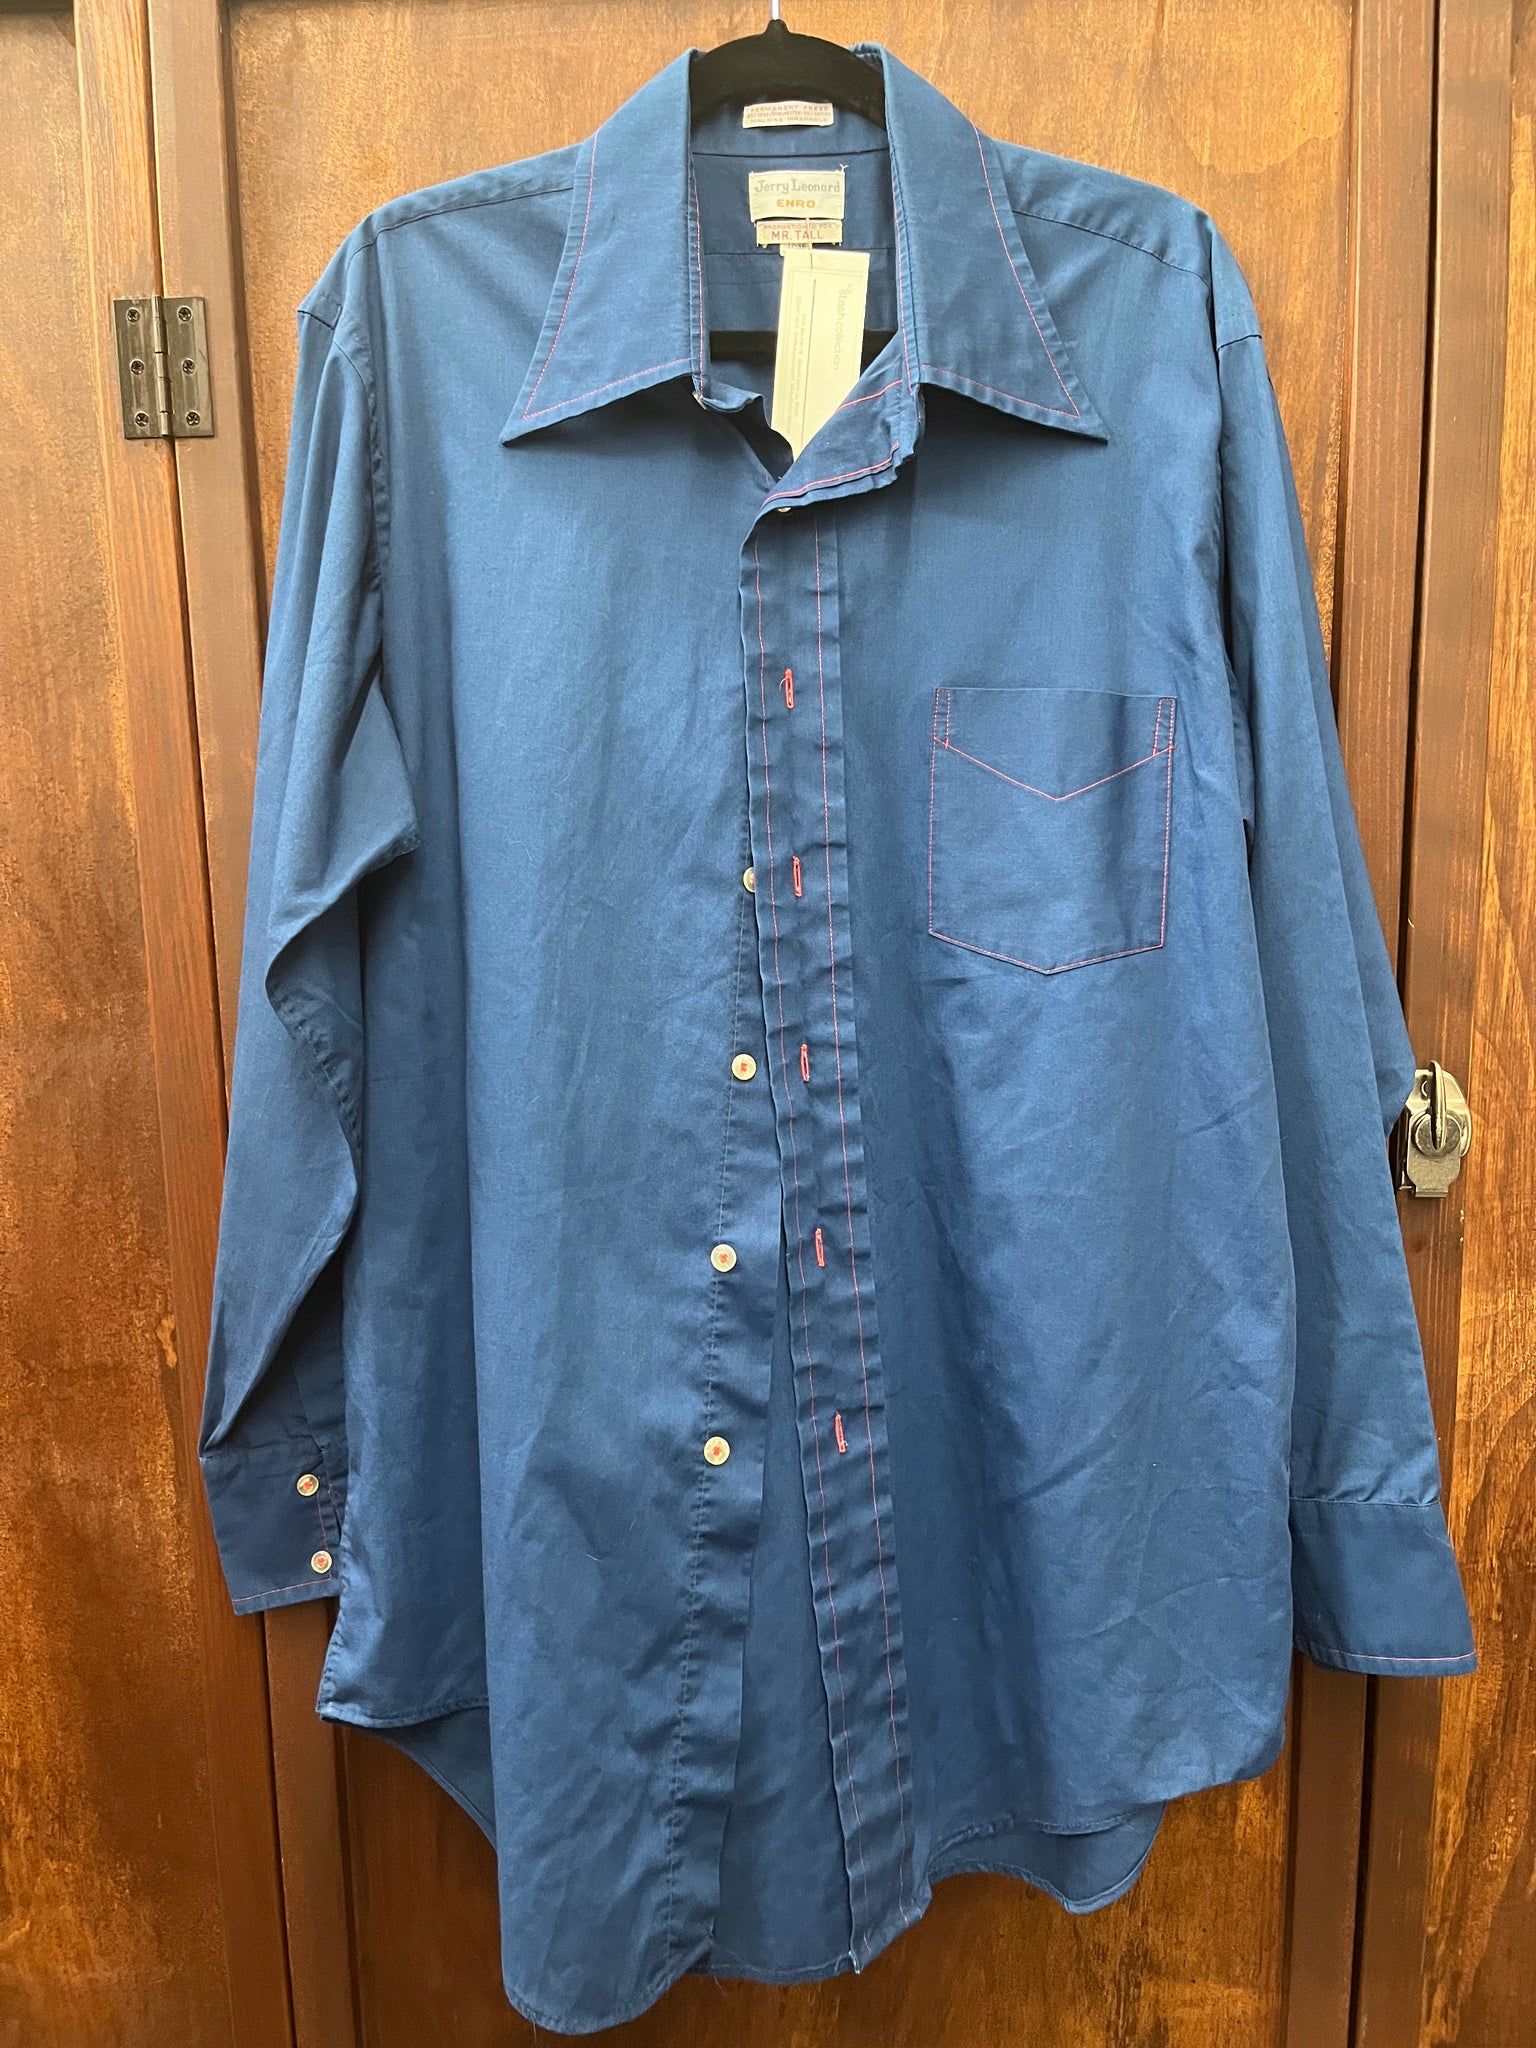 1970s MENS SHIRT-Jerry Leonard Mr Tall-blue with red stitching